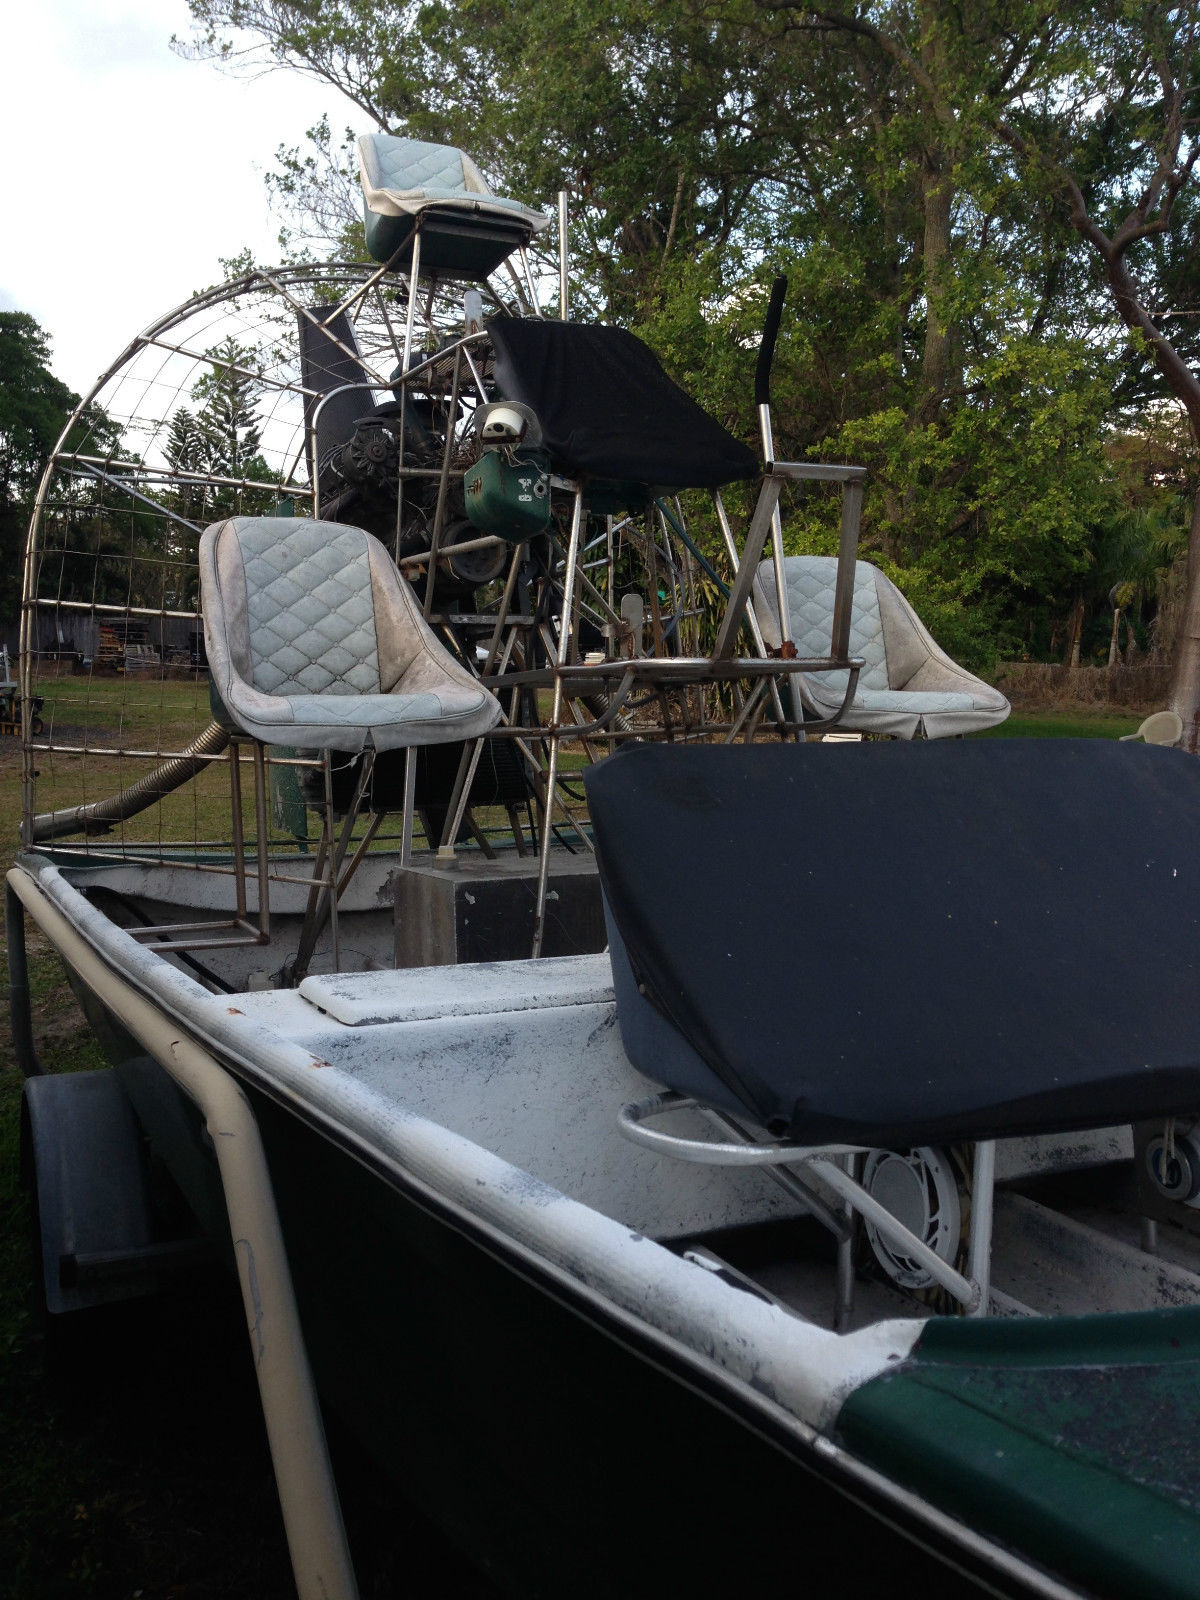 Airboat 18 Ft 1991 for sale for $500 - Boats-from-USA.com